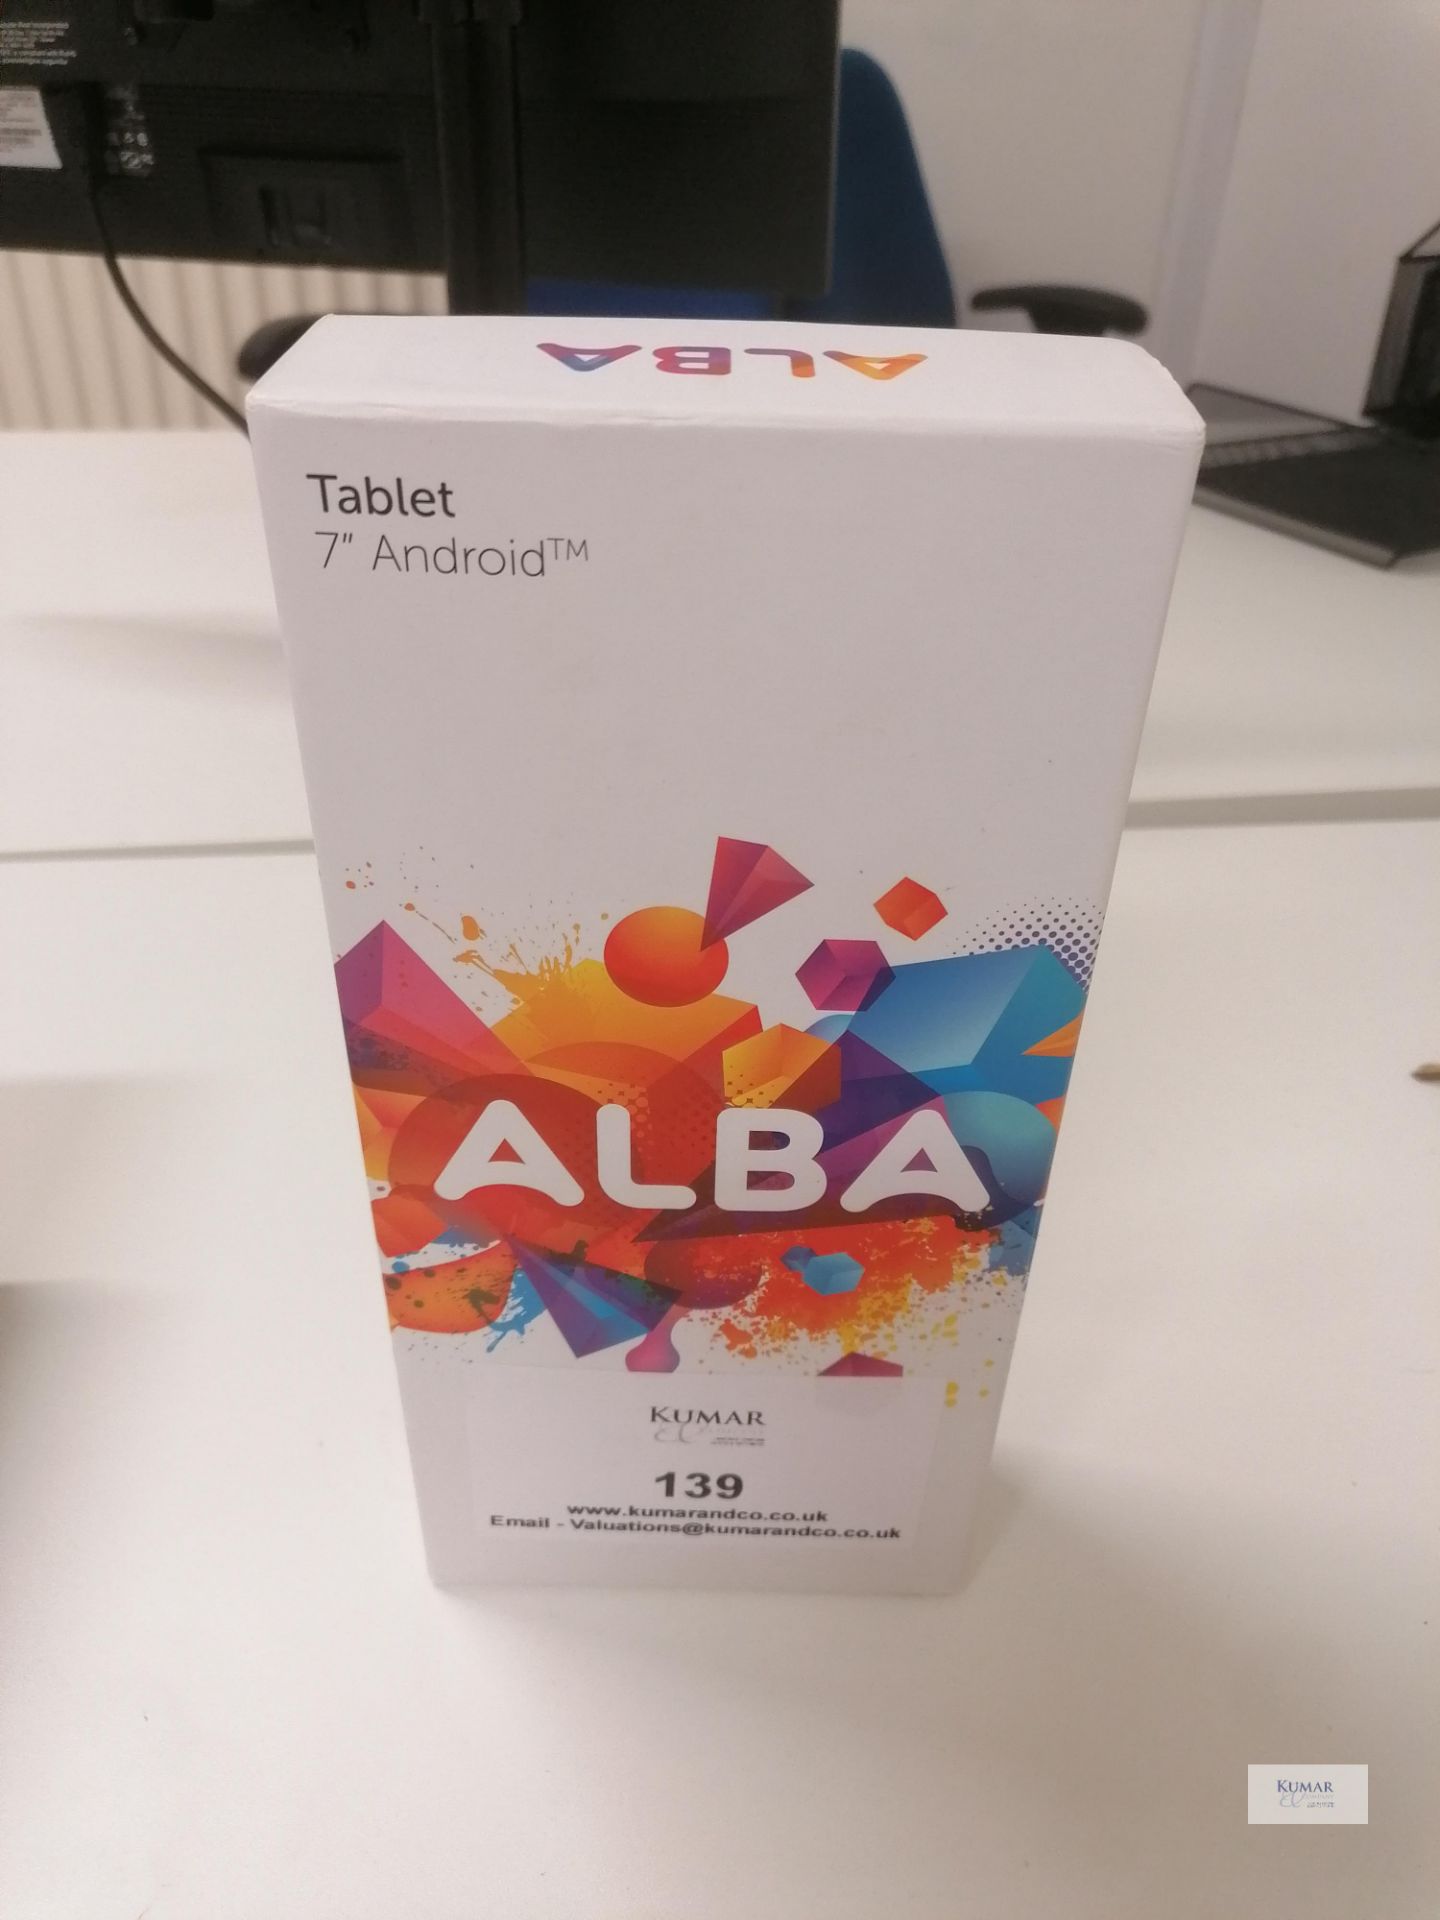 Alba Model AC07PLVS 7" Tablet with protective case,cable and charger Boxed